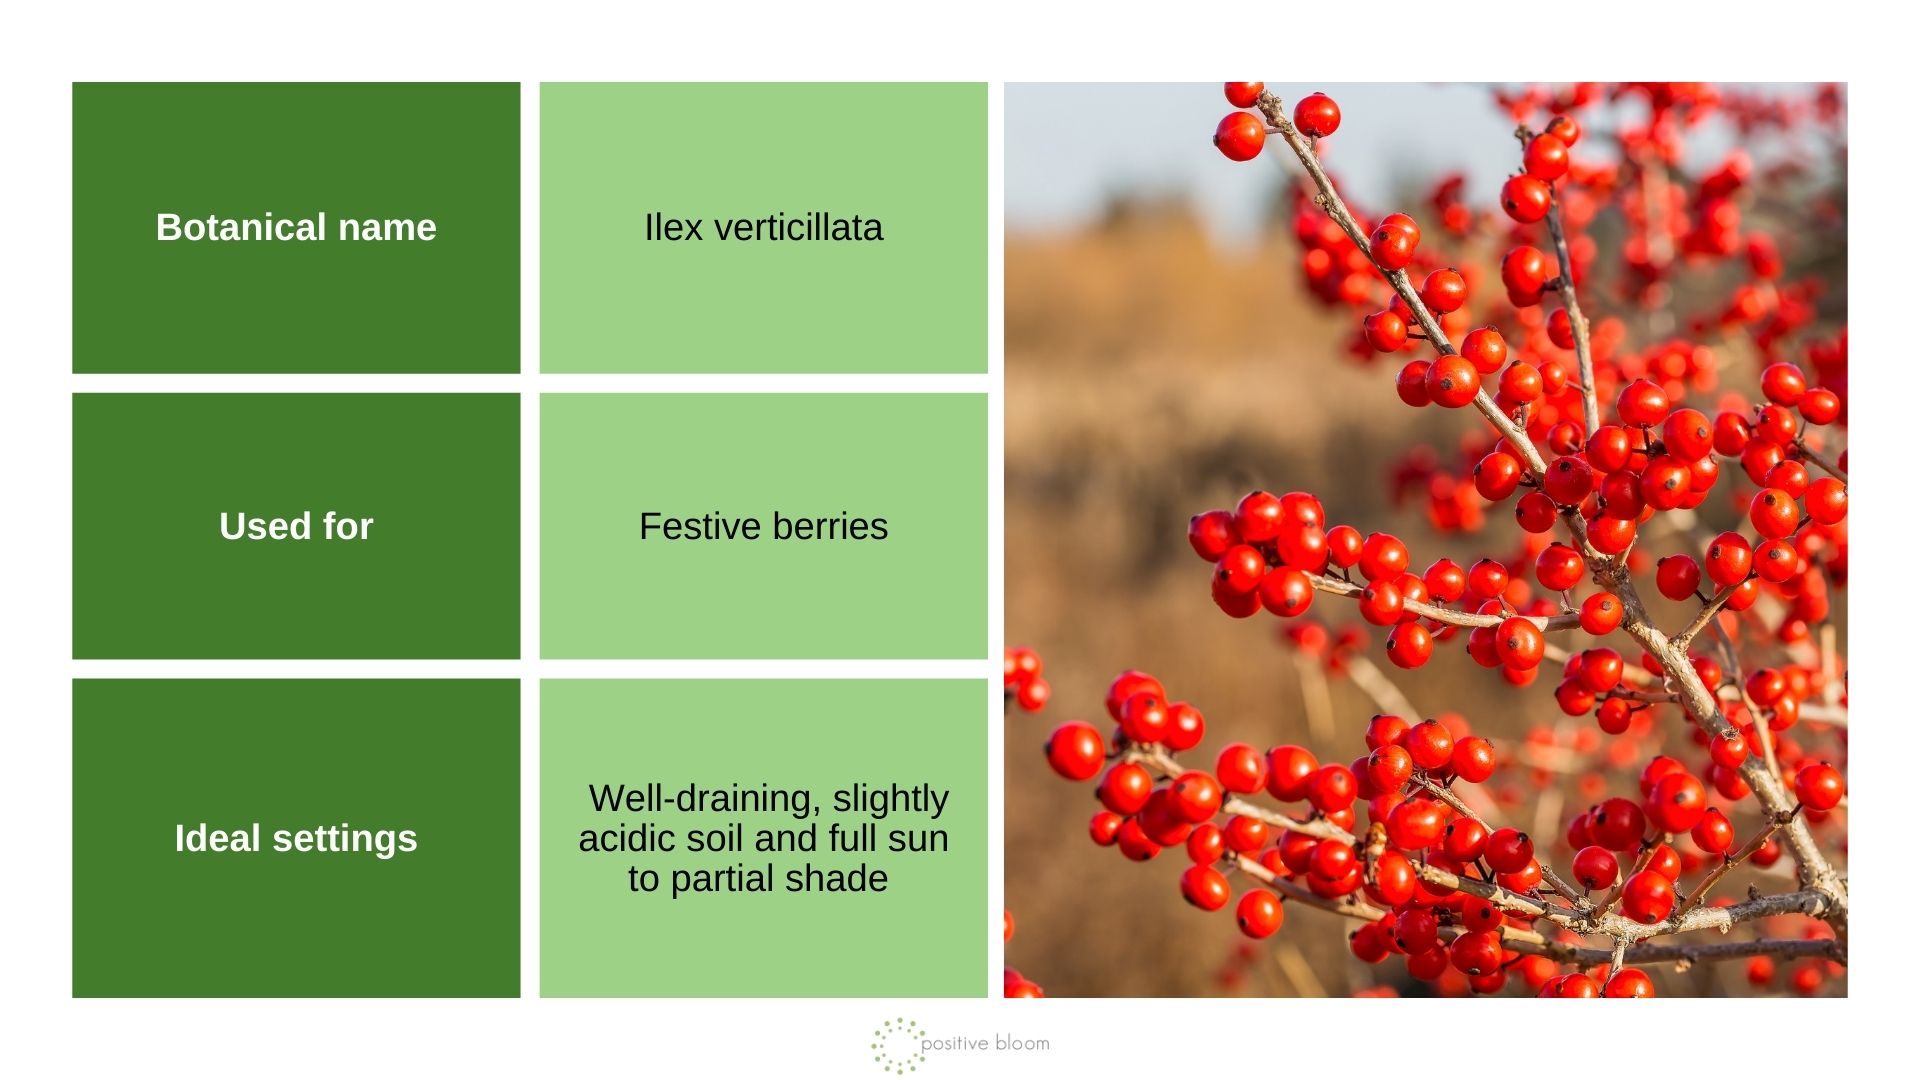 Winterberry Holly info chart and photo